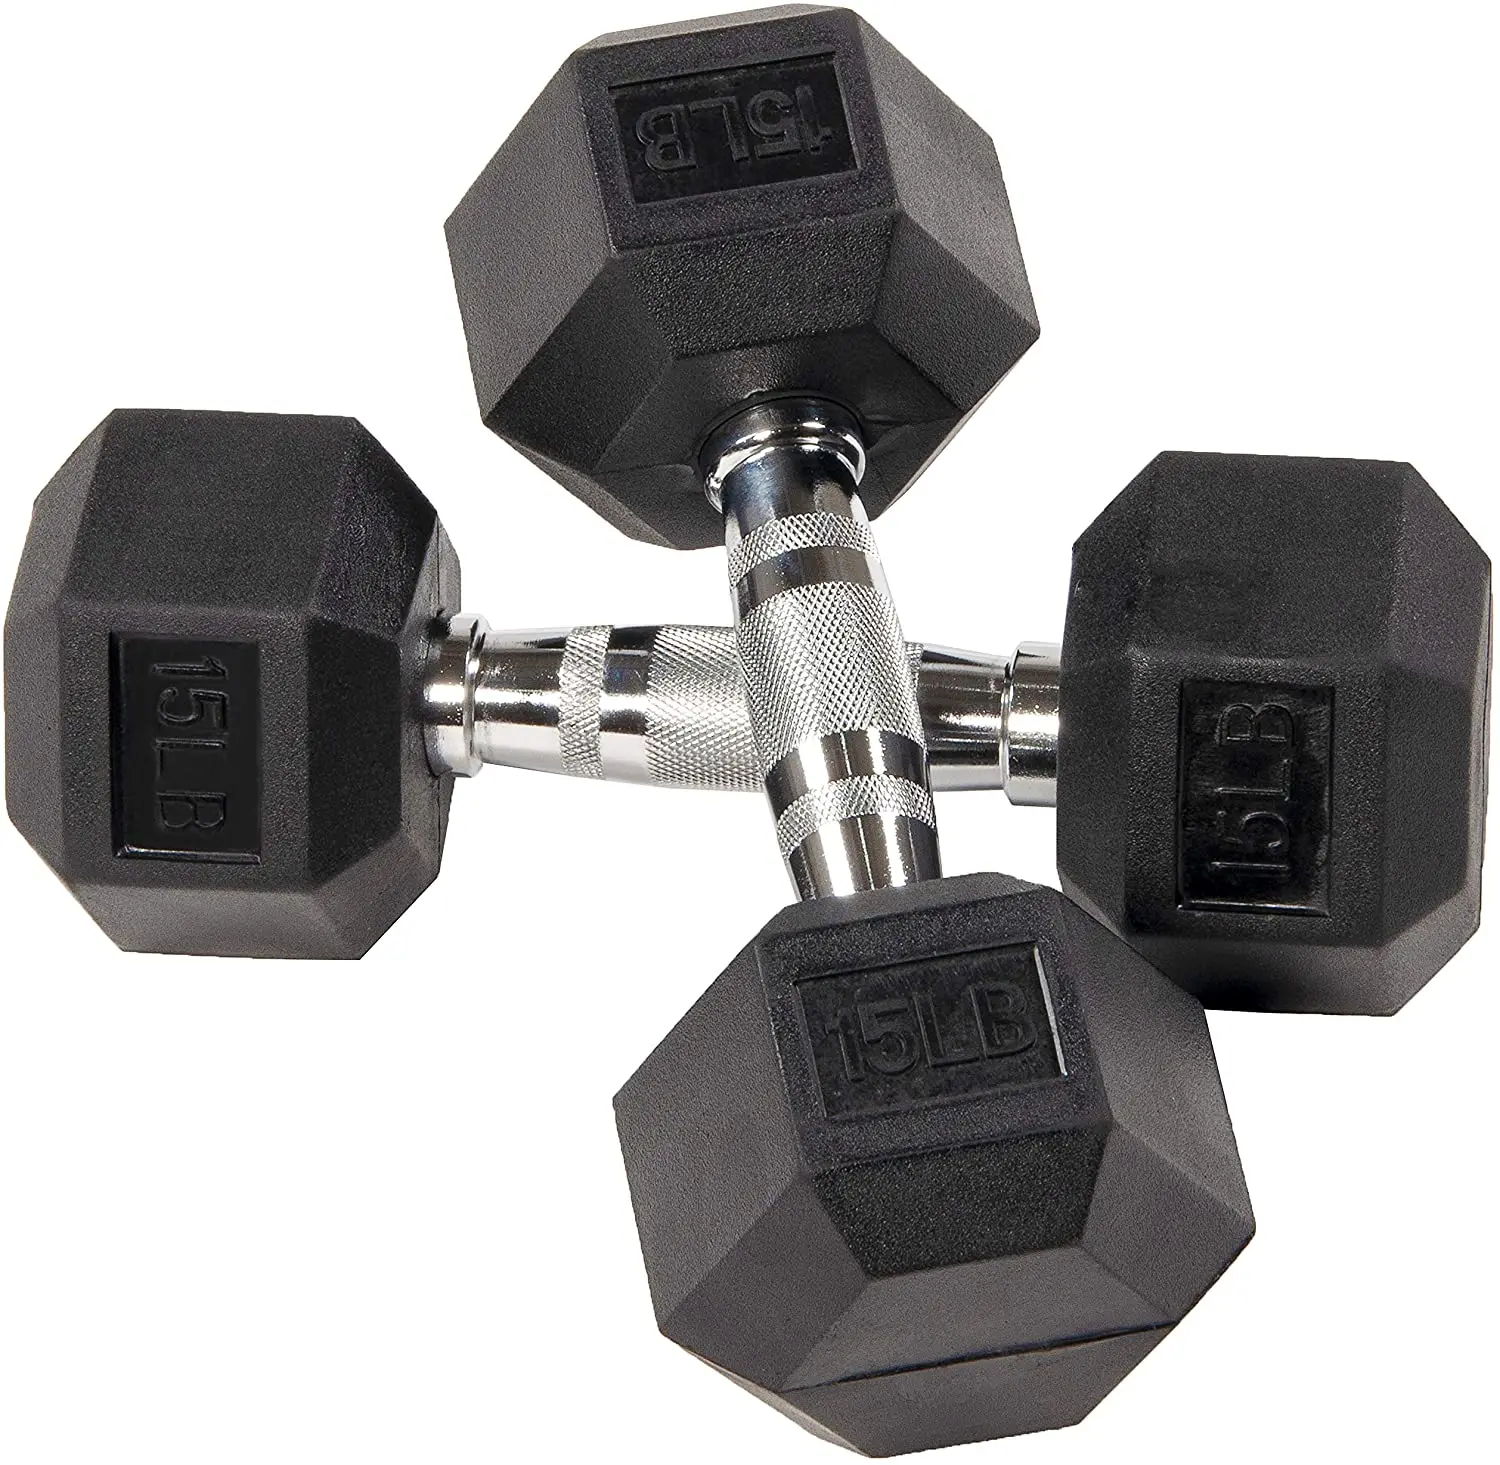 

Low MOQ Gym Equipment Home Used Factory supplied Weights 5kg 50kg Cheap Hex Rubber Dumbbells, Black,red,blue,purple,pink.